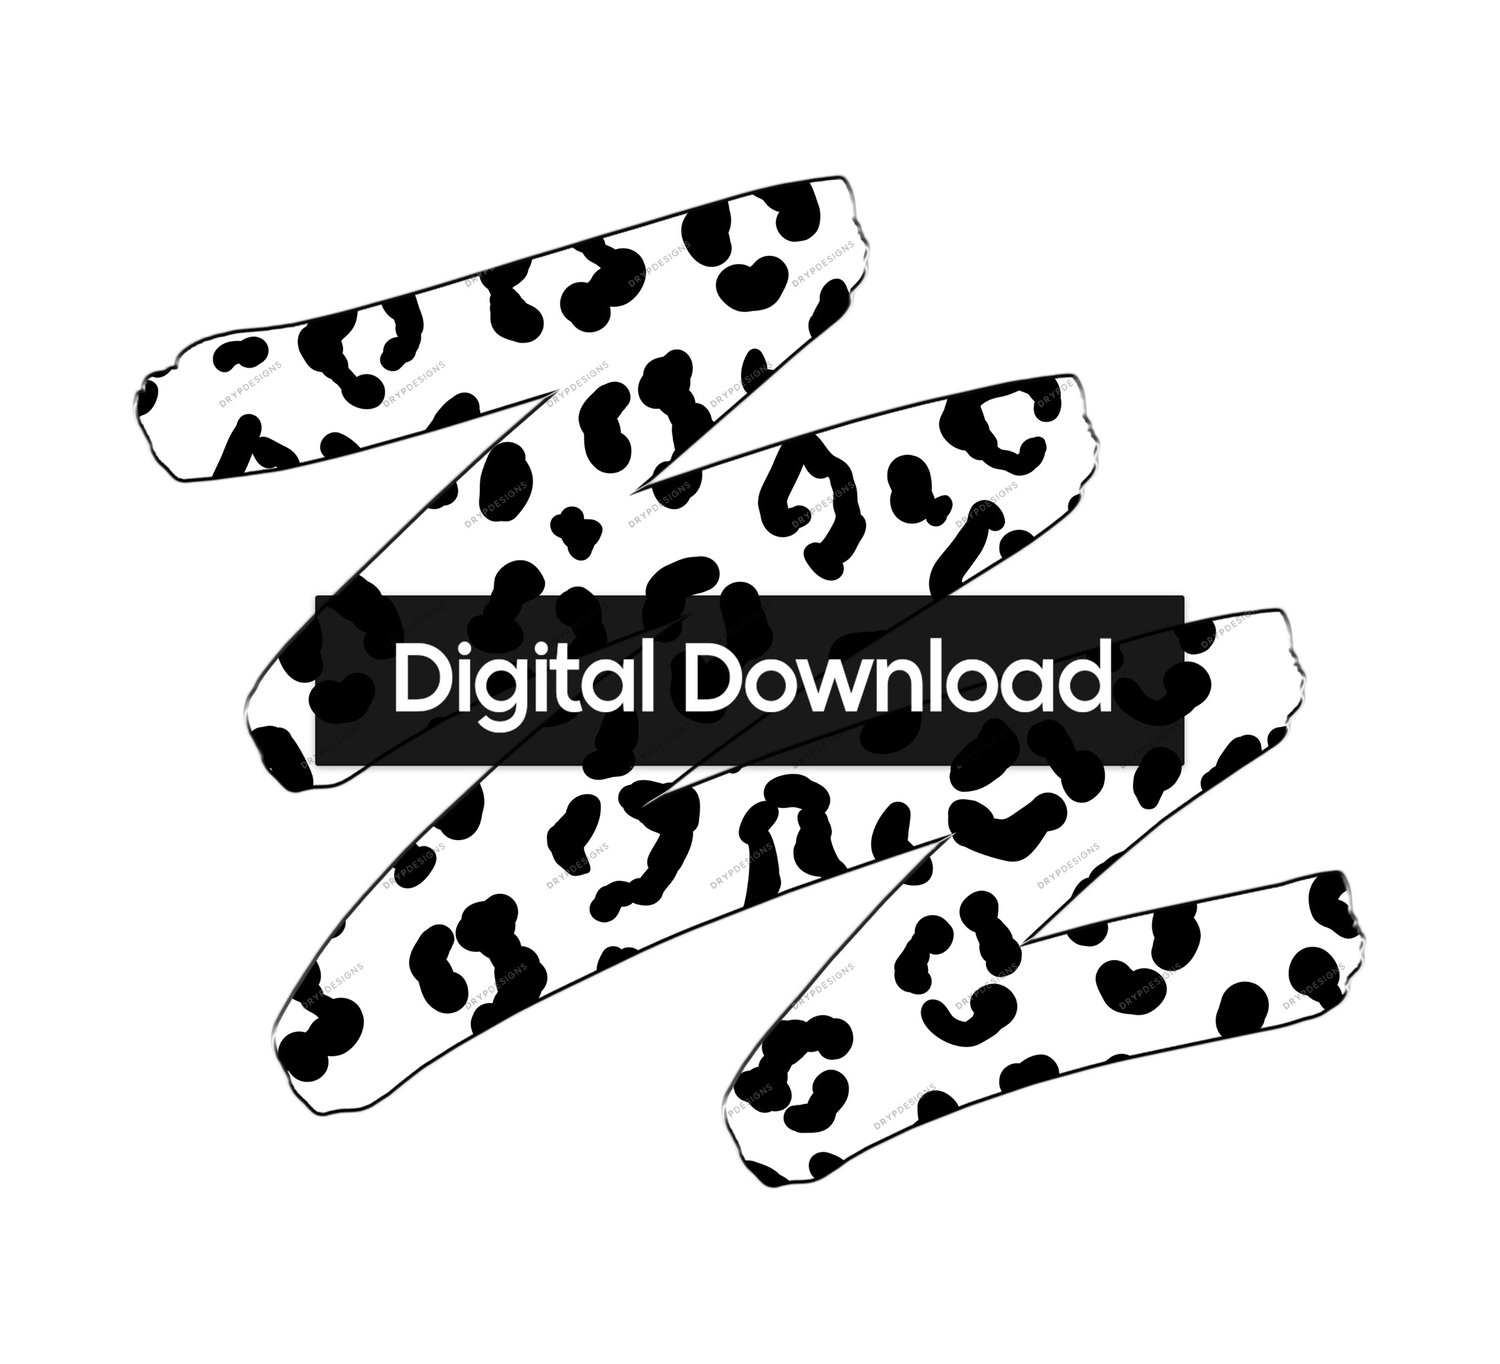 Black + White Leopard Print Seamless Pattern — drypdesigns